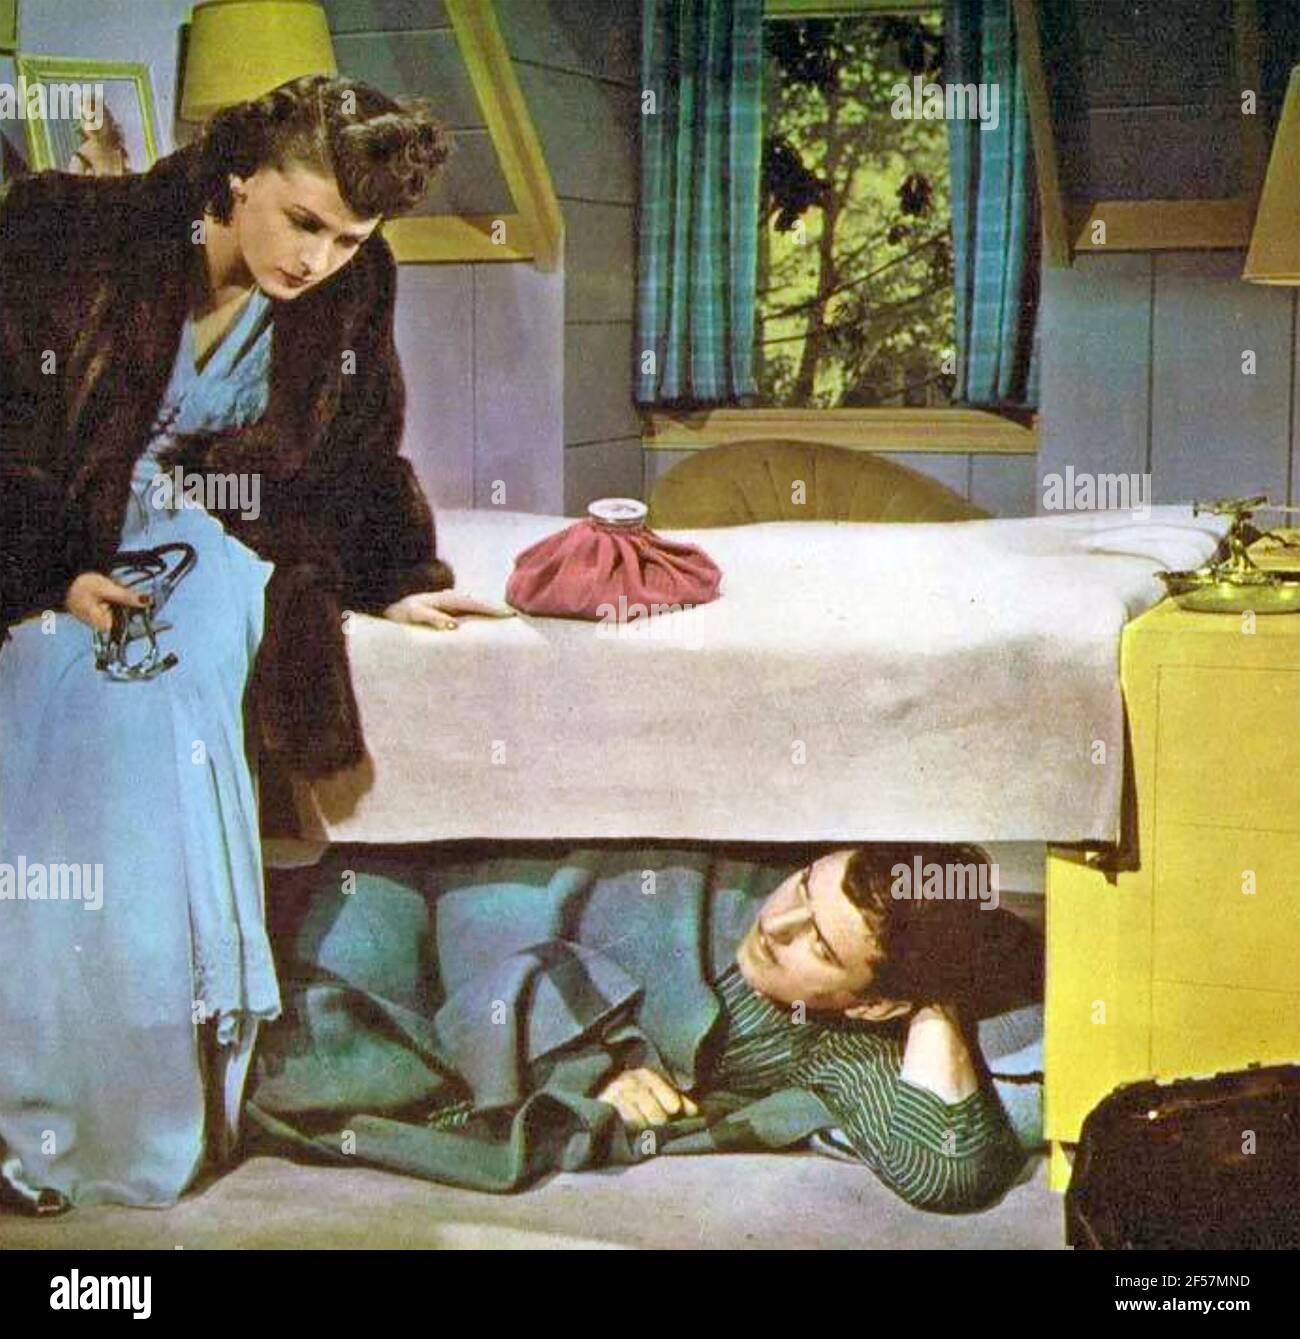 BEDSIDE MANNER 1945 United Artists film with Ruth Hussey and John Carroll Stock Photo